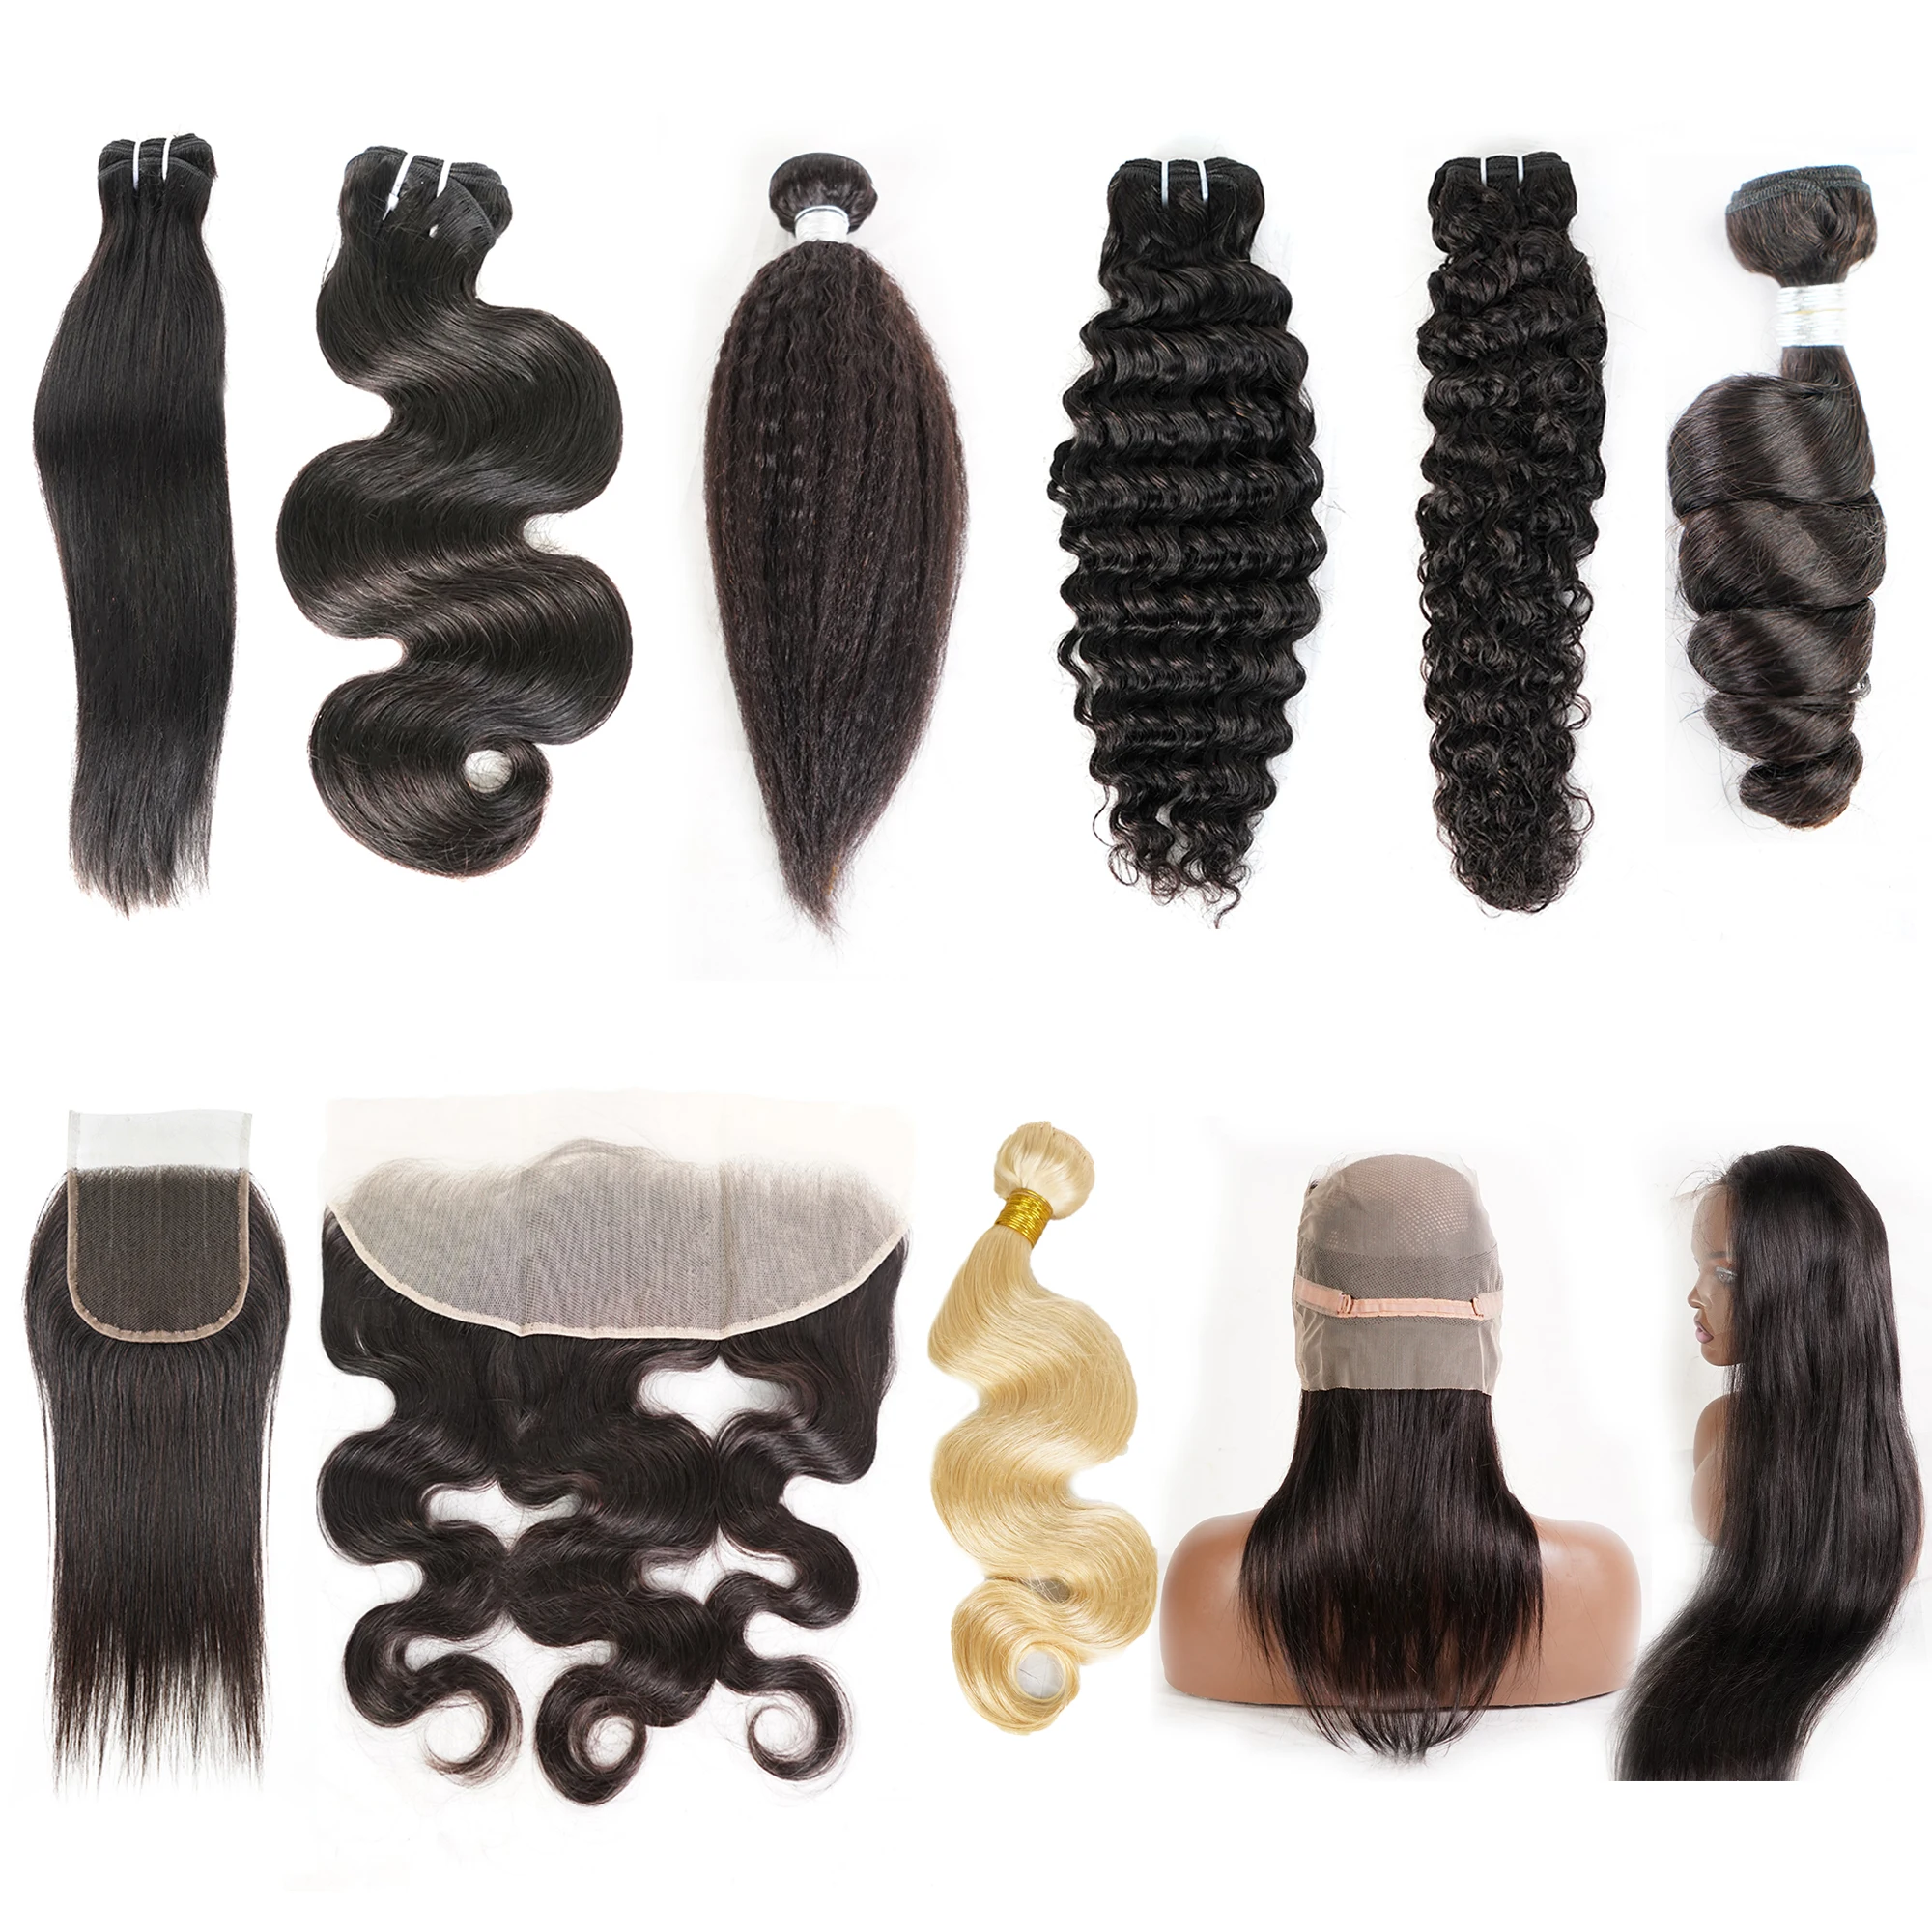 Human Hair Weaves Bundles With Closure Wet And Deep Wavy Hair Bundles Wavy Human Hair Bundles